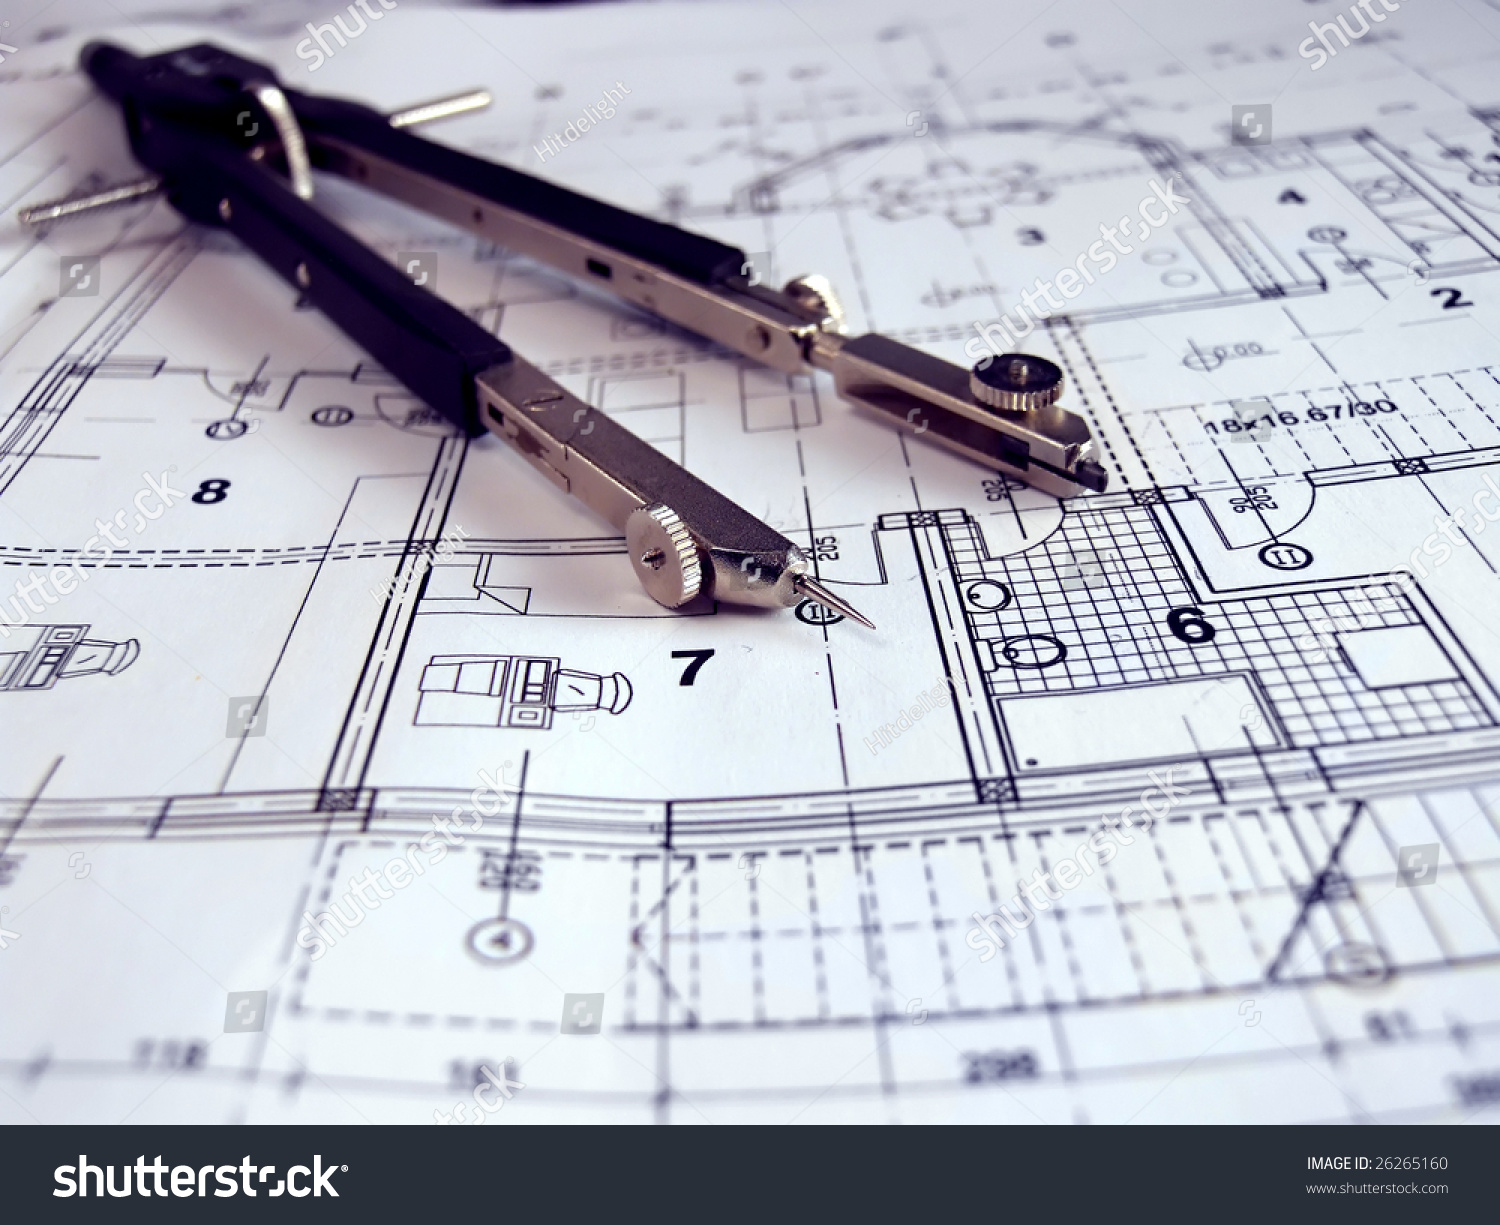 Dividers On Architectural Plan Stock Photo 26265160 : Shutterstock